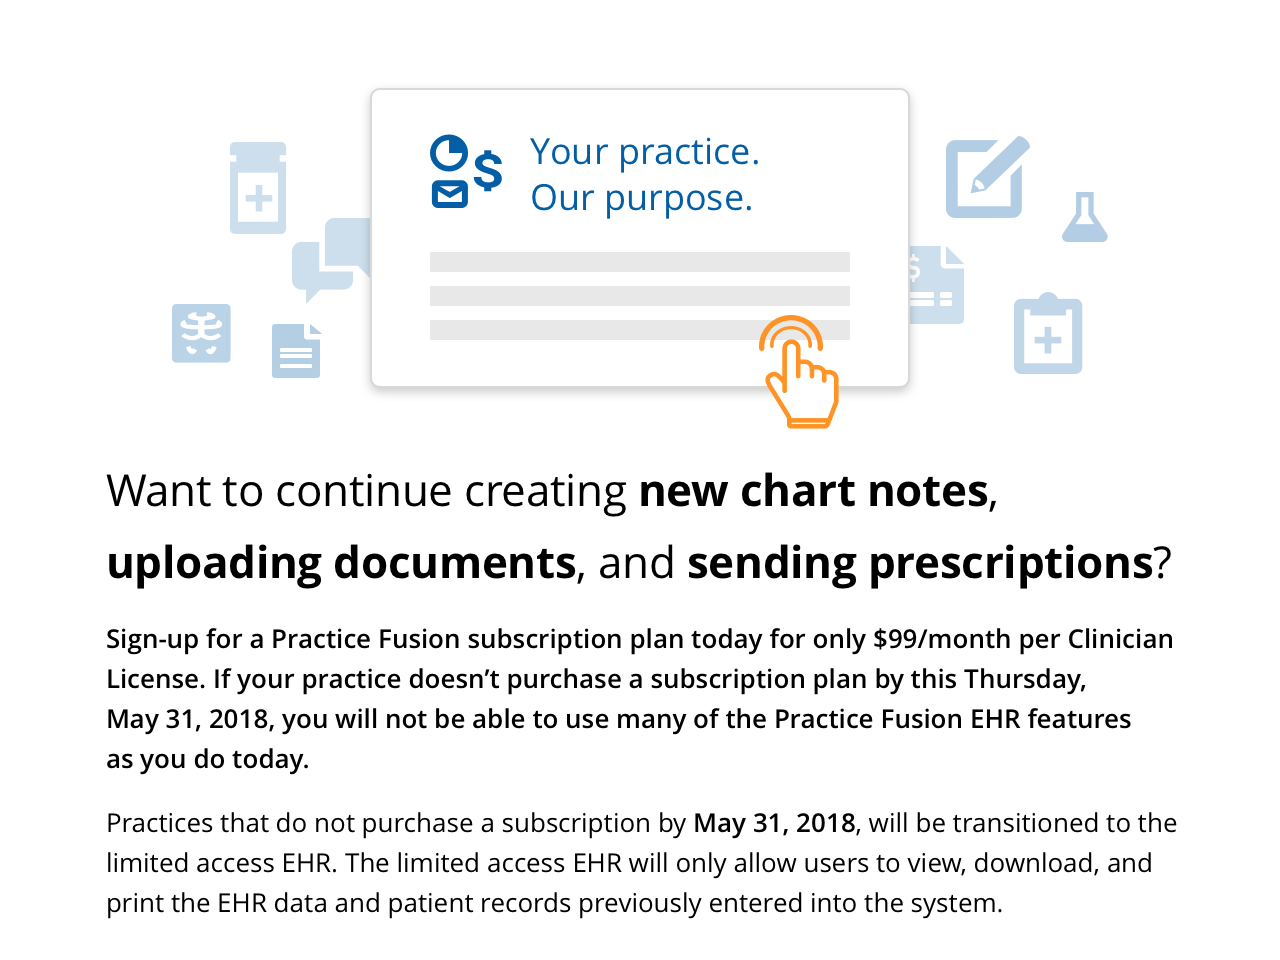 Sign up for a Practice Fusion subscription plan today for only $99/month per Clinician License. If your practice doesn't purchase a subscription plan by this Thursday, May 31, 2018, you will not be able to use many of the Practice Fusion EHR features as you do today.